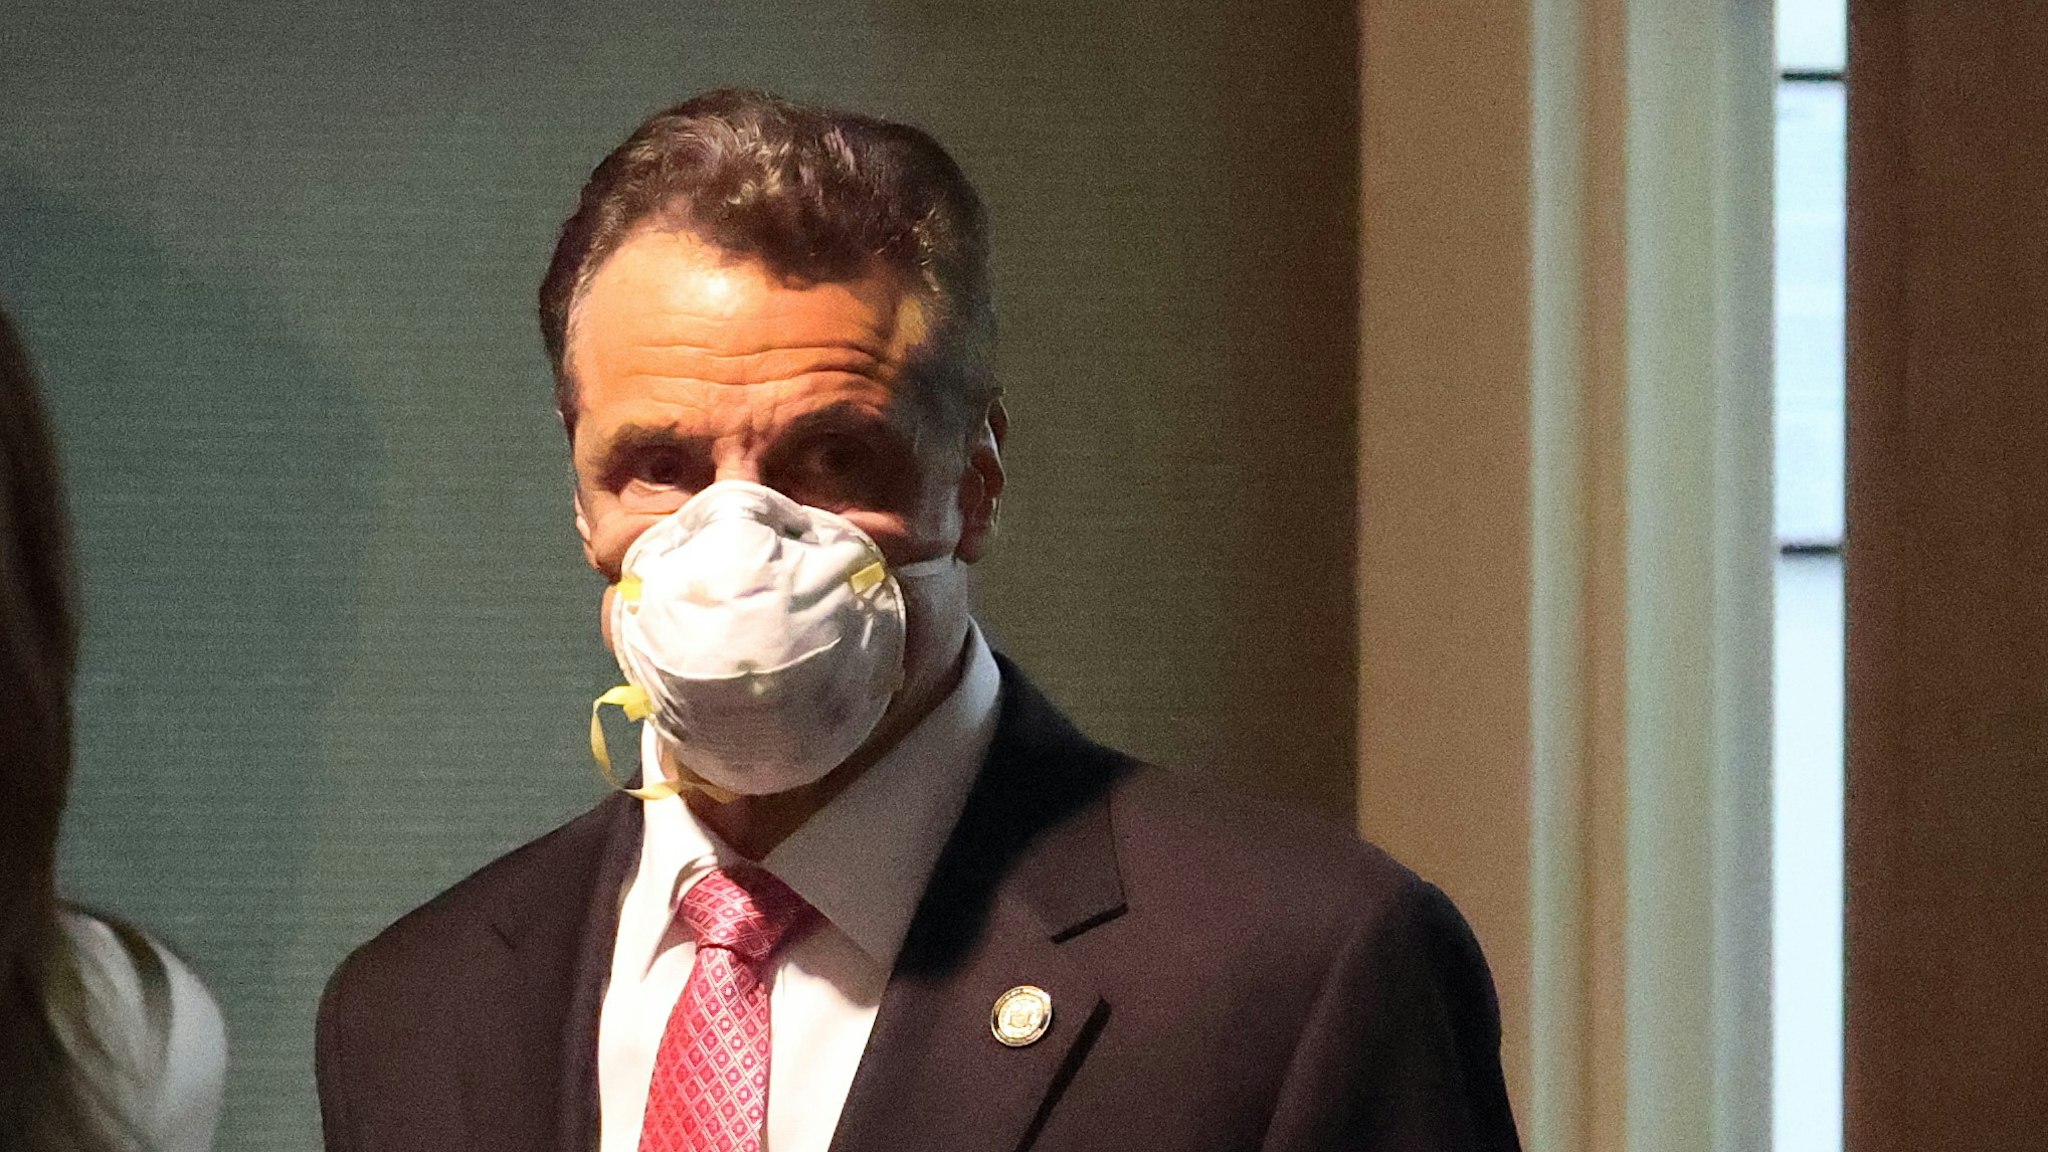 MANHASSET, NEW YORK - MAY 06: New York Governor Andrew Cuomo enters the room wearing a mask prior to speaking during a Coronavirus Briefing At Northwell Feinstein Institute For Medical Research on May 06, 2020 in Manhasset, New York. (Photo by